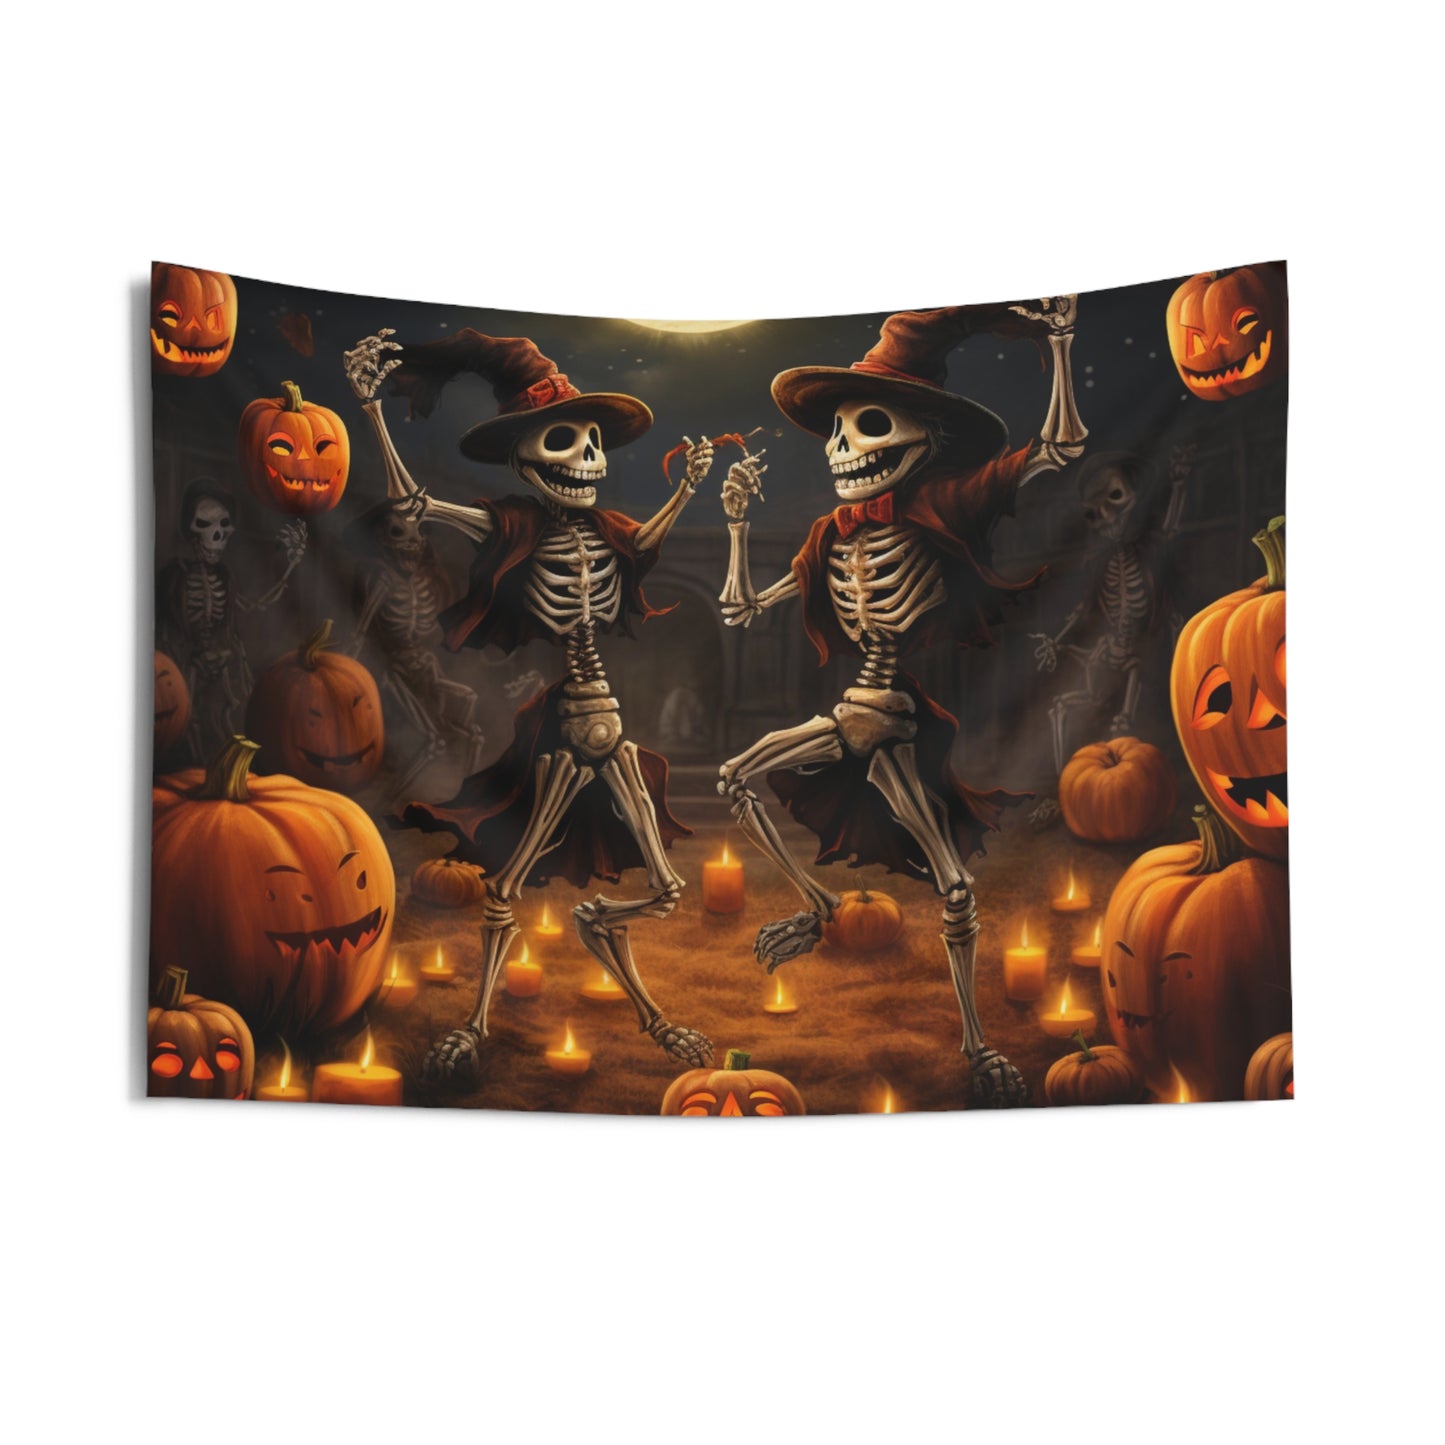 Dancing Skeleton Halloween Tapestry, Pumpkins Wall Art Hanging Cool Unique Landscape Aesthetic Large Small Decor College Dorm Room Starcove Fashion